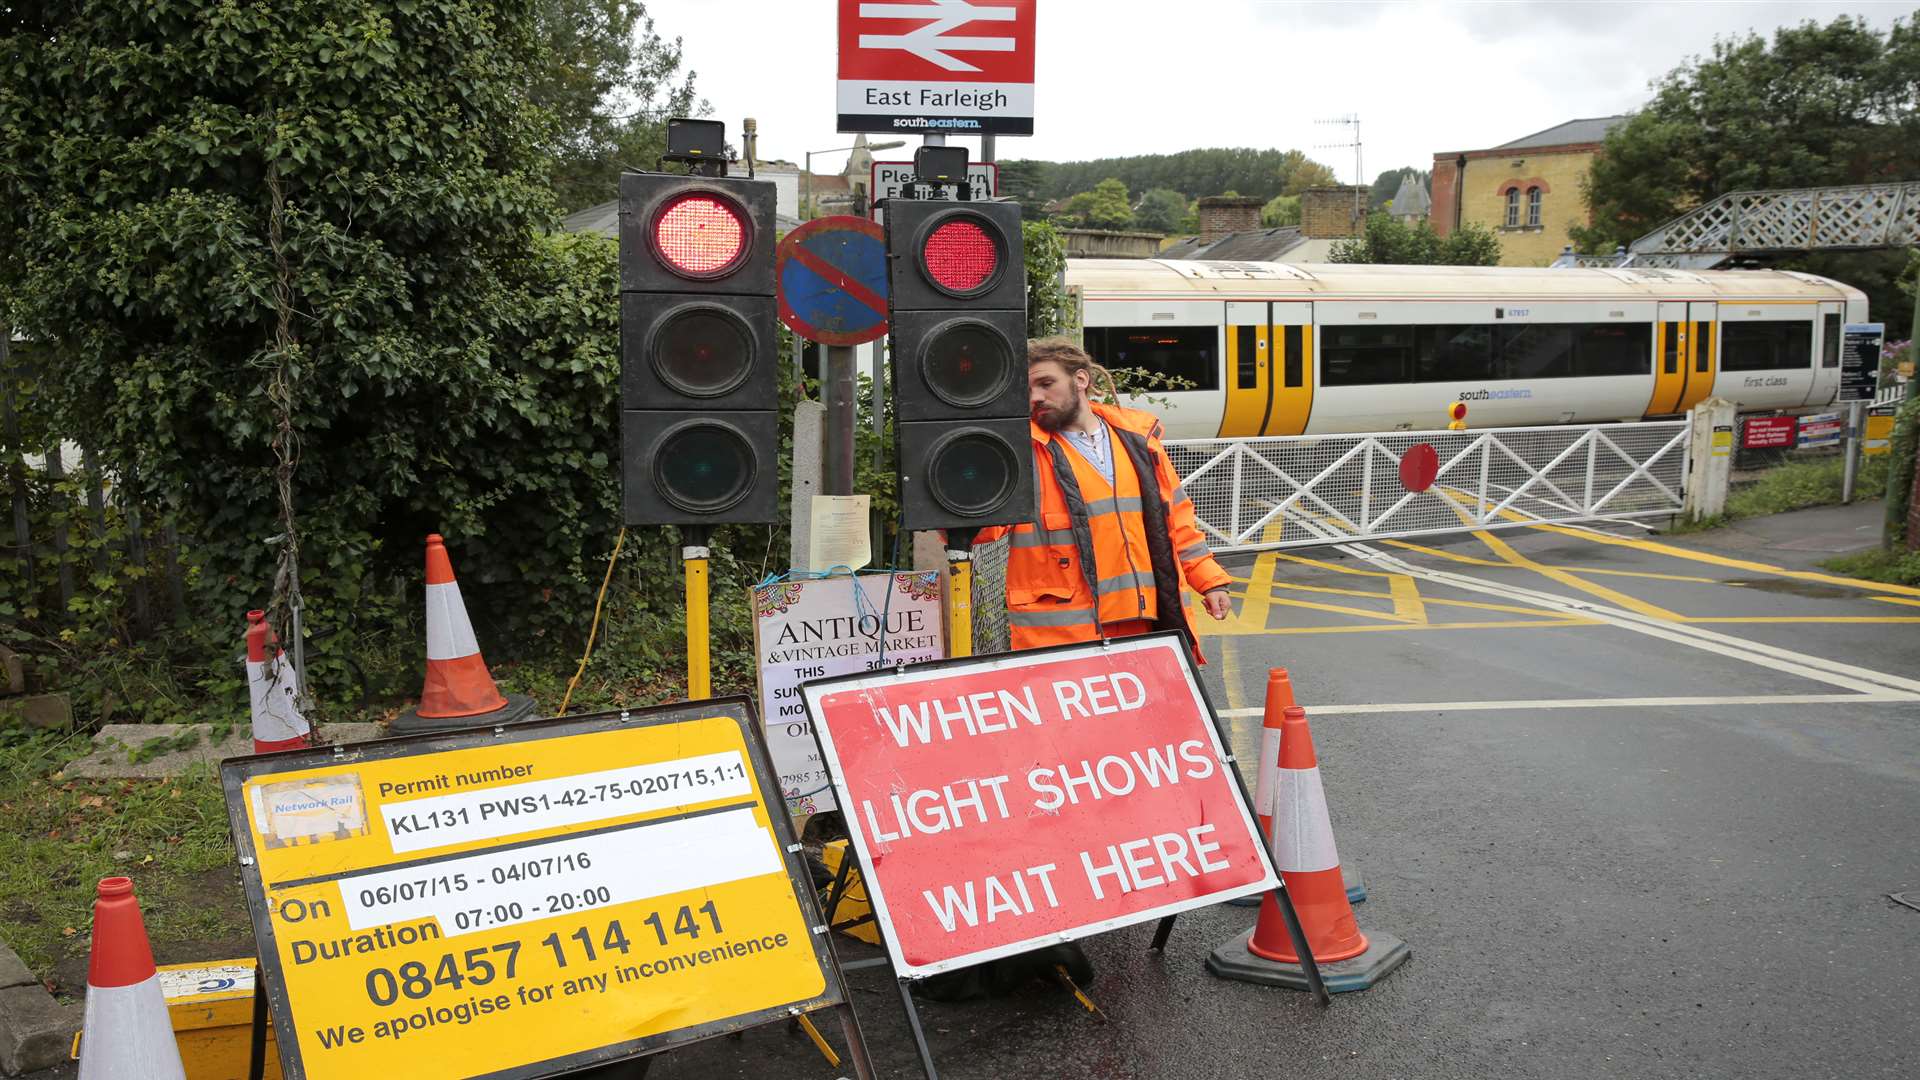 A worker from Centurion Transport LTD activating the traffic lights ahead of a train passing East Fairleigh level crossing, opening and closing the gates for traffic.